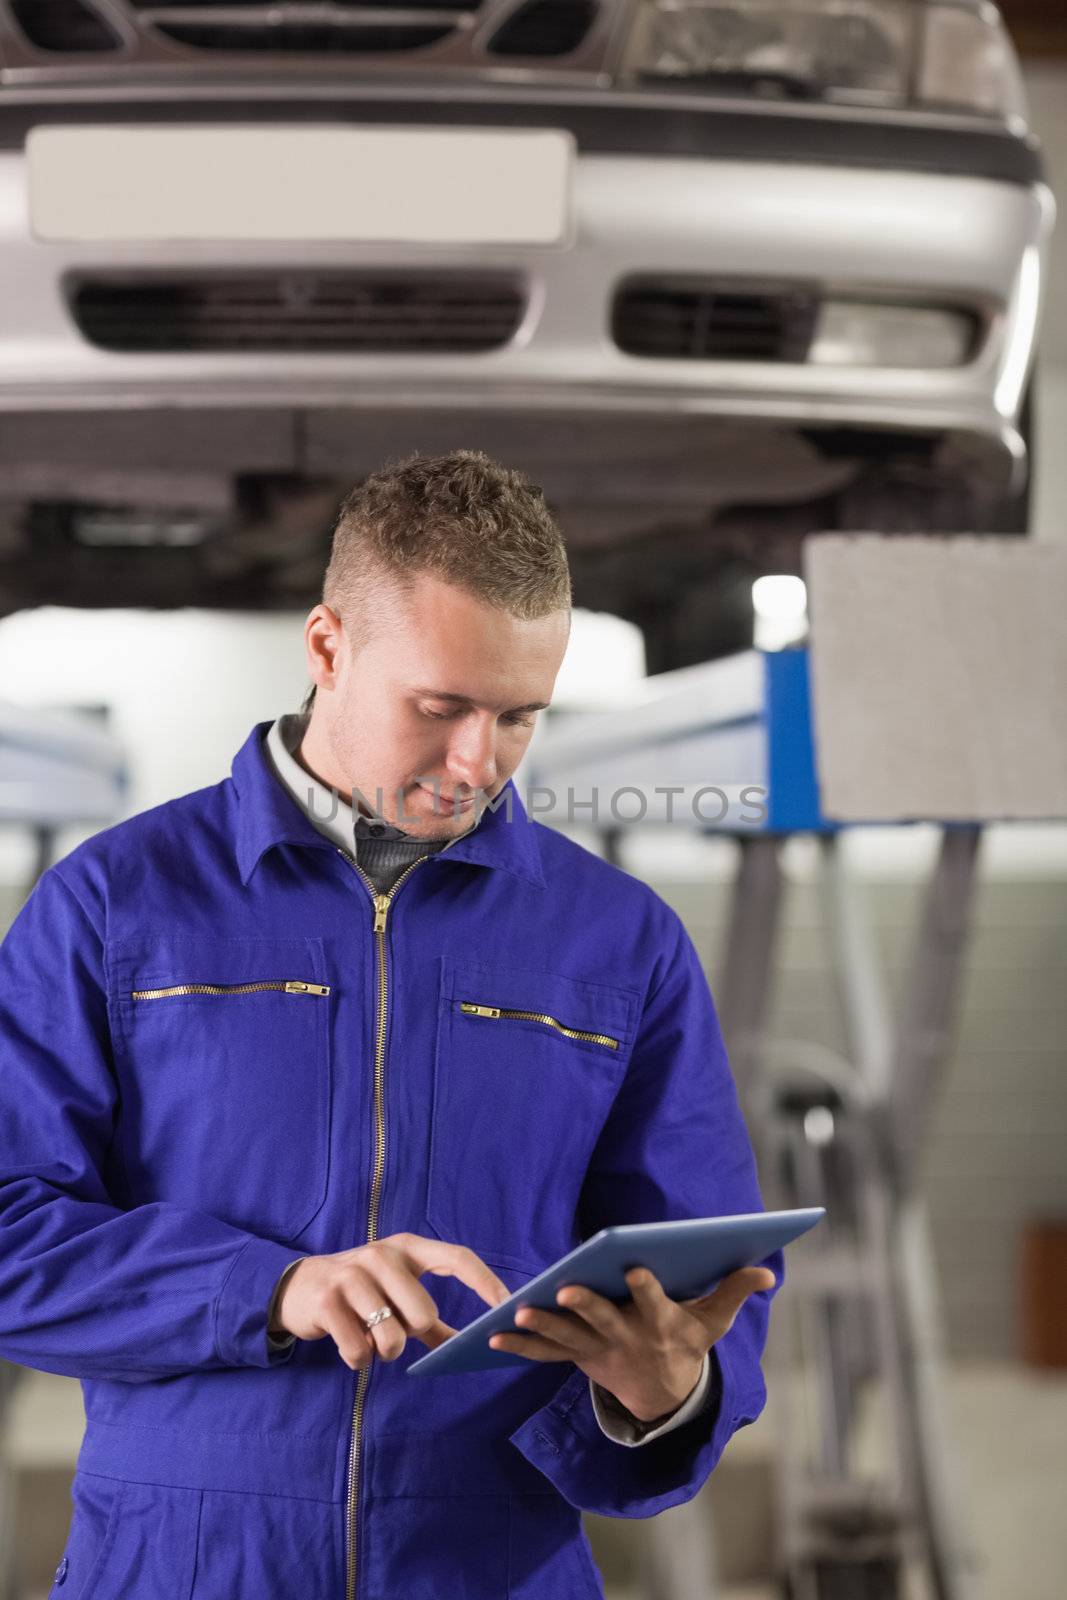 Concentrated mechanic holding a tablet computer in a garage